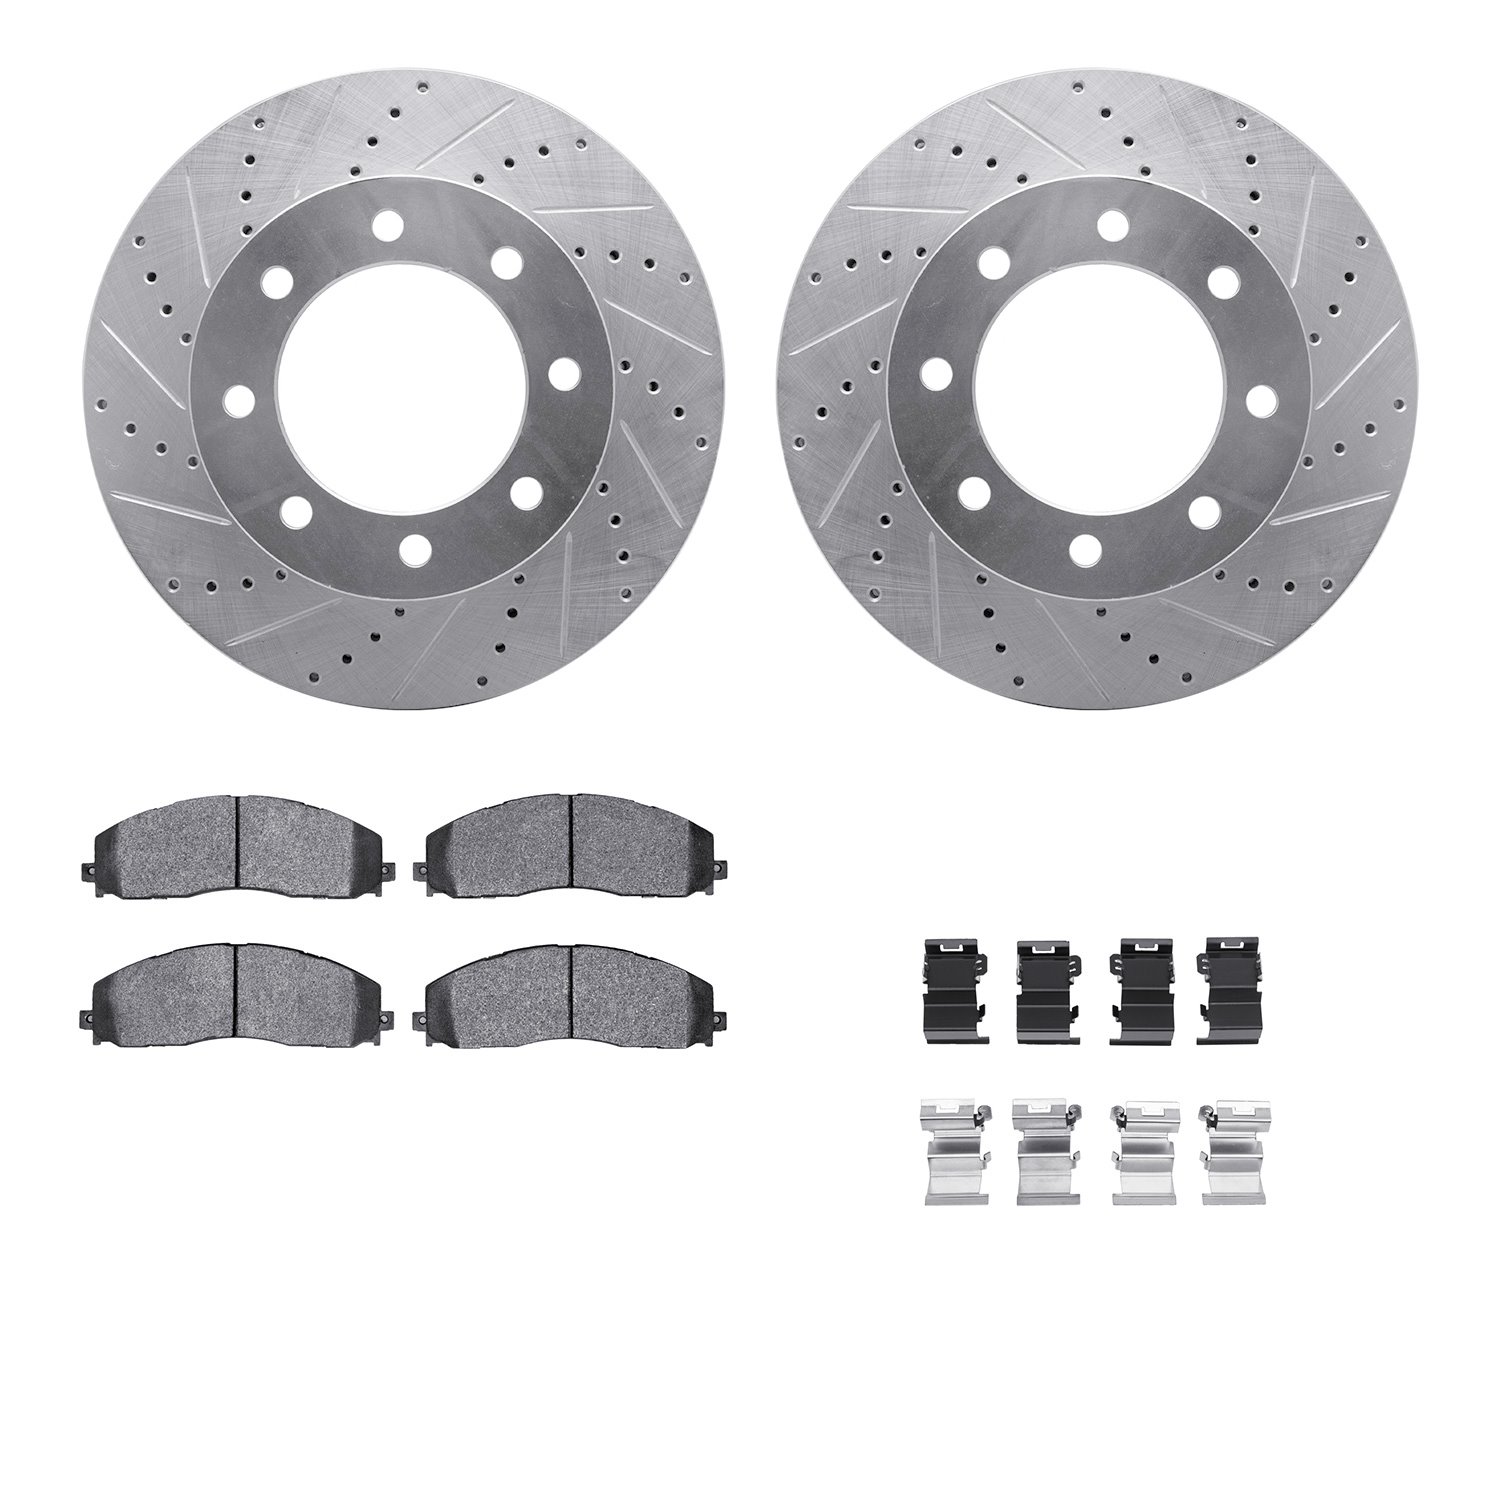 7412-54098 Drilled/Slotted Brake Rotors with Ultimate-Duty Brake Pads Kit & Hardware [Silver], Fits Select Ford/Lincoln/Mercury/